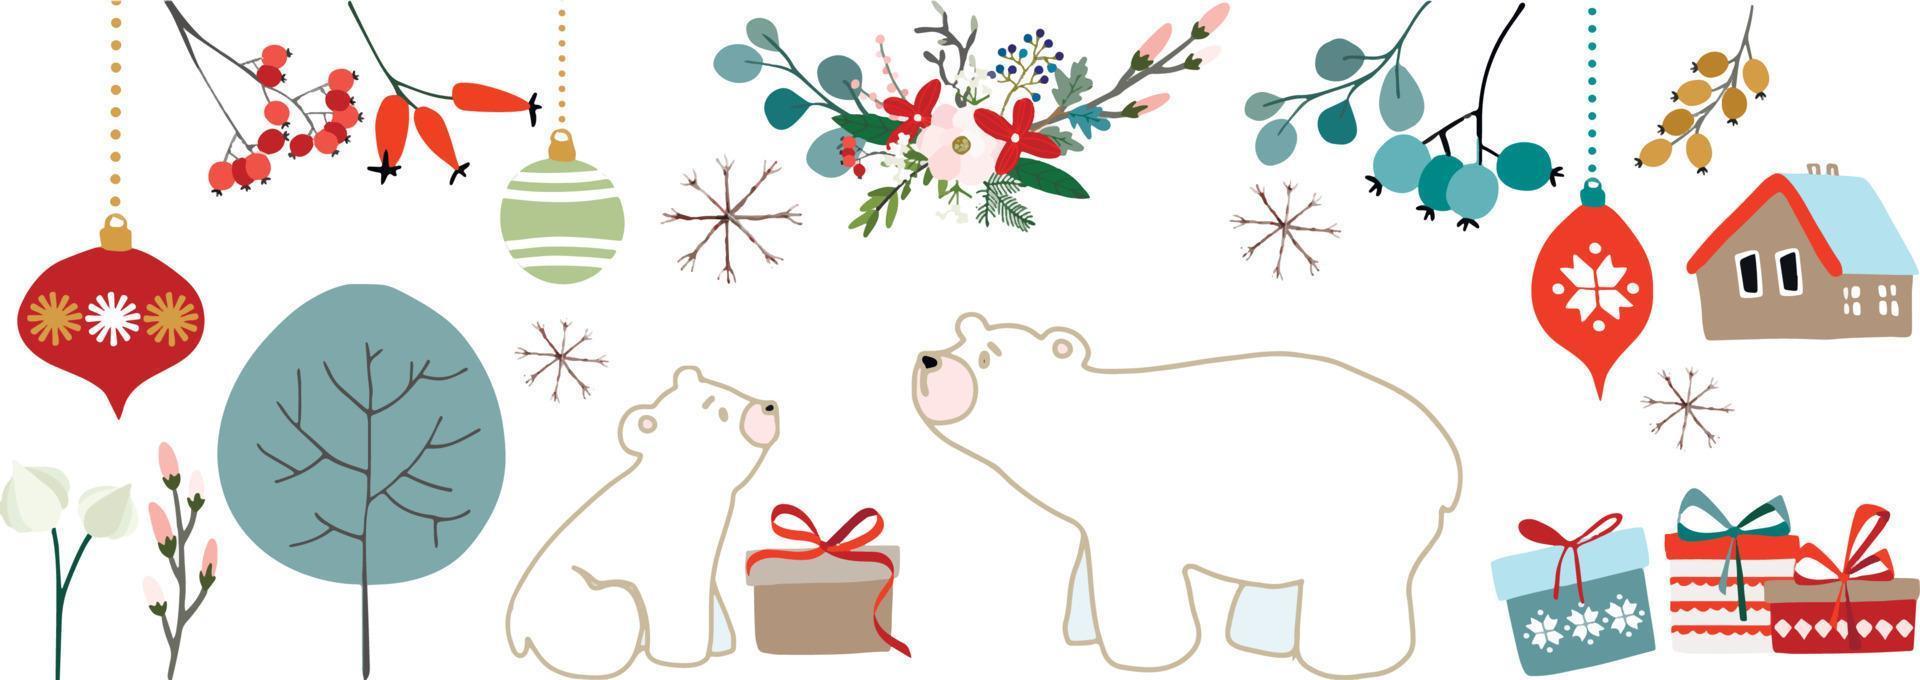 Holiday, Christmas, New year pattern with bears, Christmas tree, balls, home, gift box. vector